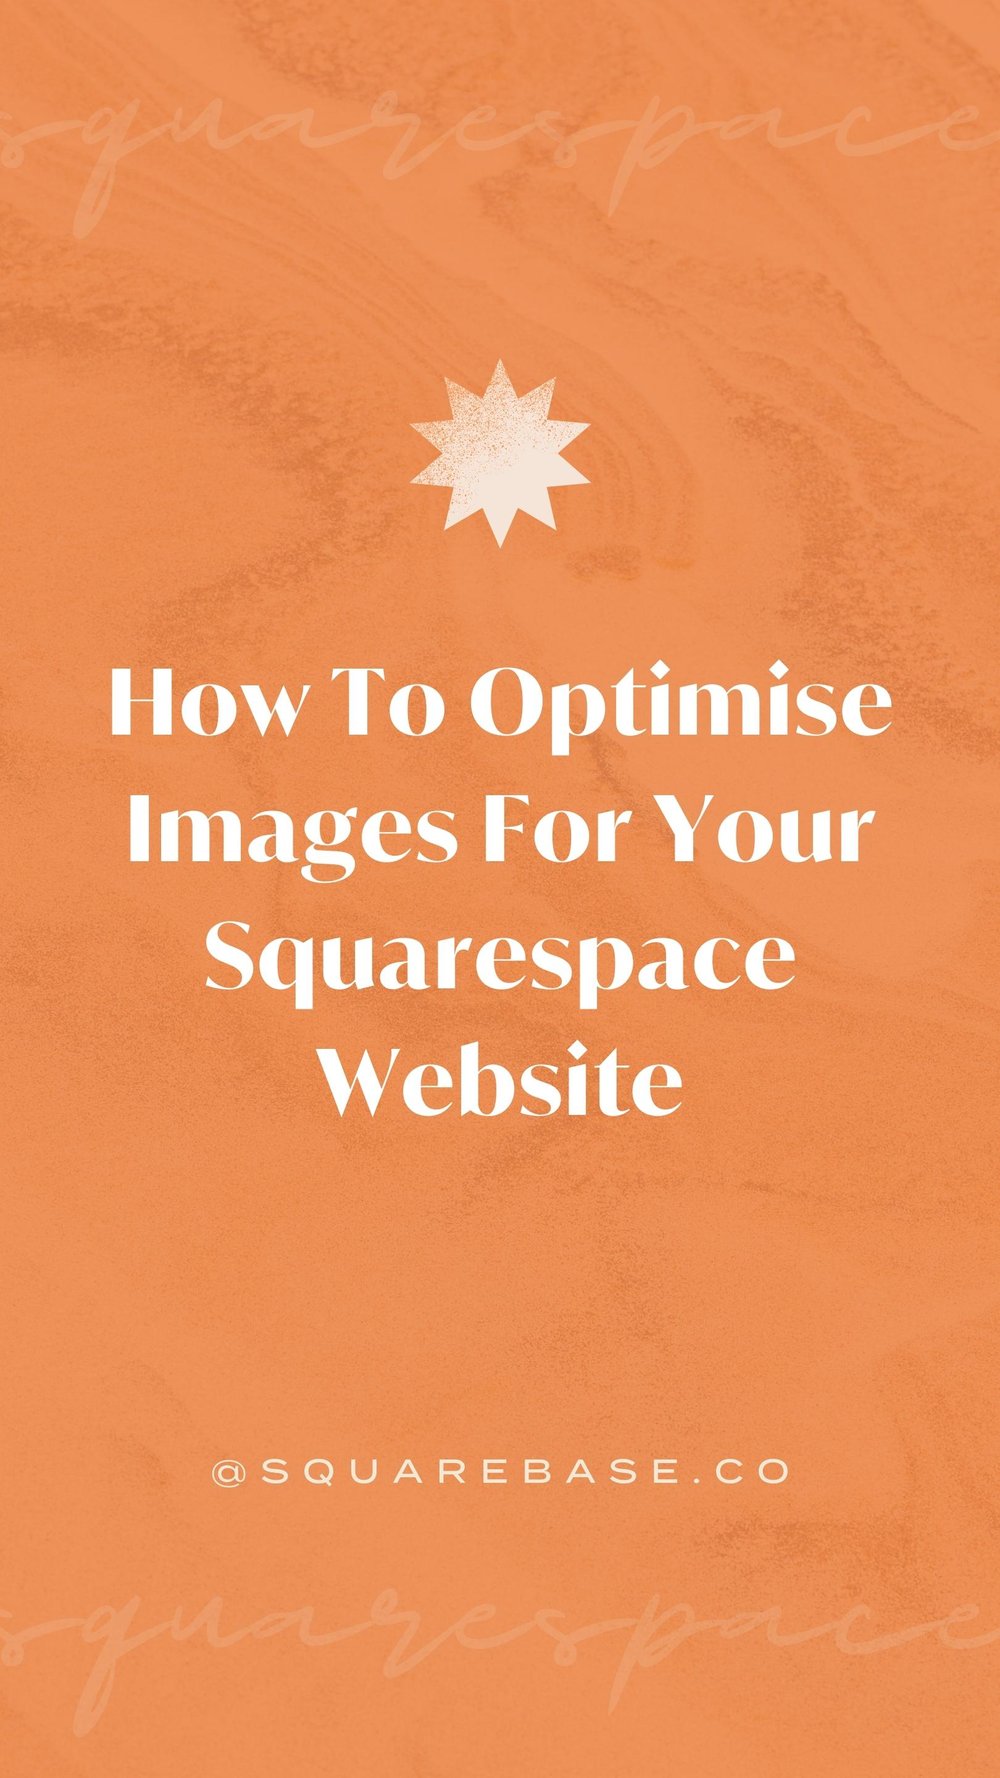 How to Optimise Images for Your Squarespace Website